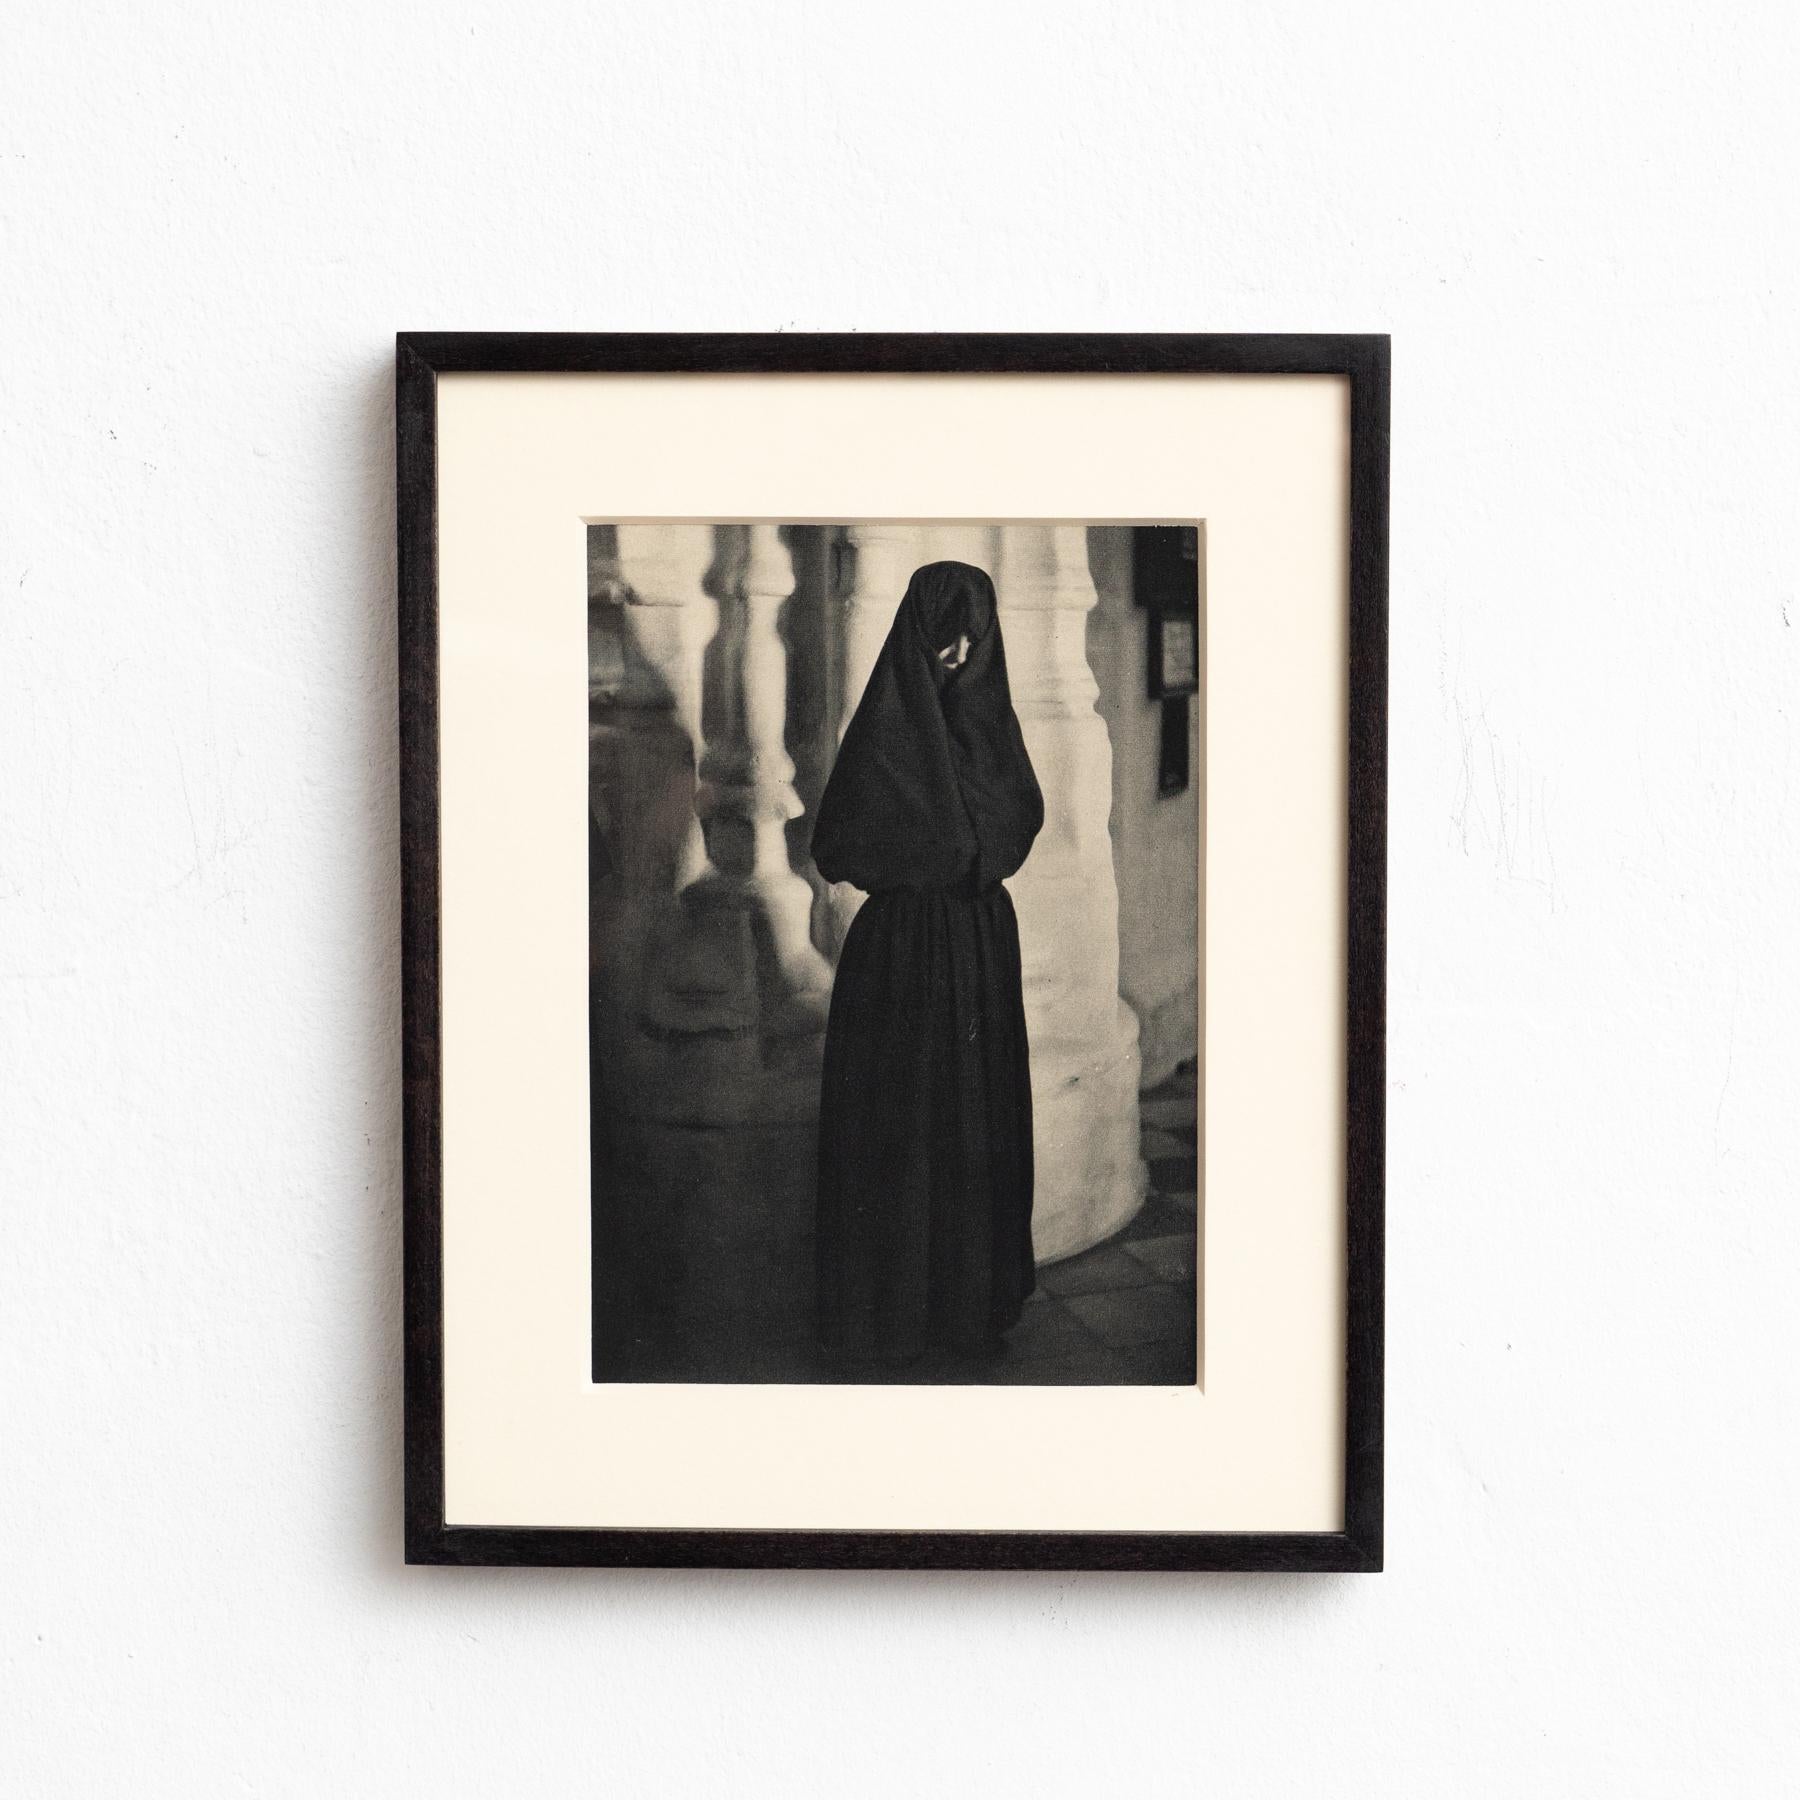 Jose Ortiz Echagüe's Vision: Spanish Heritage in Photogravure, circa 1930

From 1930
Photography by Jose Ortiz Echagüe
Photogravure
Framed in black lacquered wood
Dimensions: 31.5 cm (H) x 25 cm (W) x 3 cm (D)

Step into the mesmerizing world of